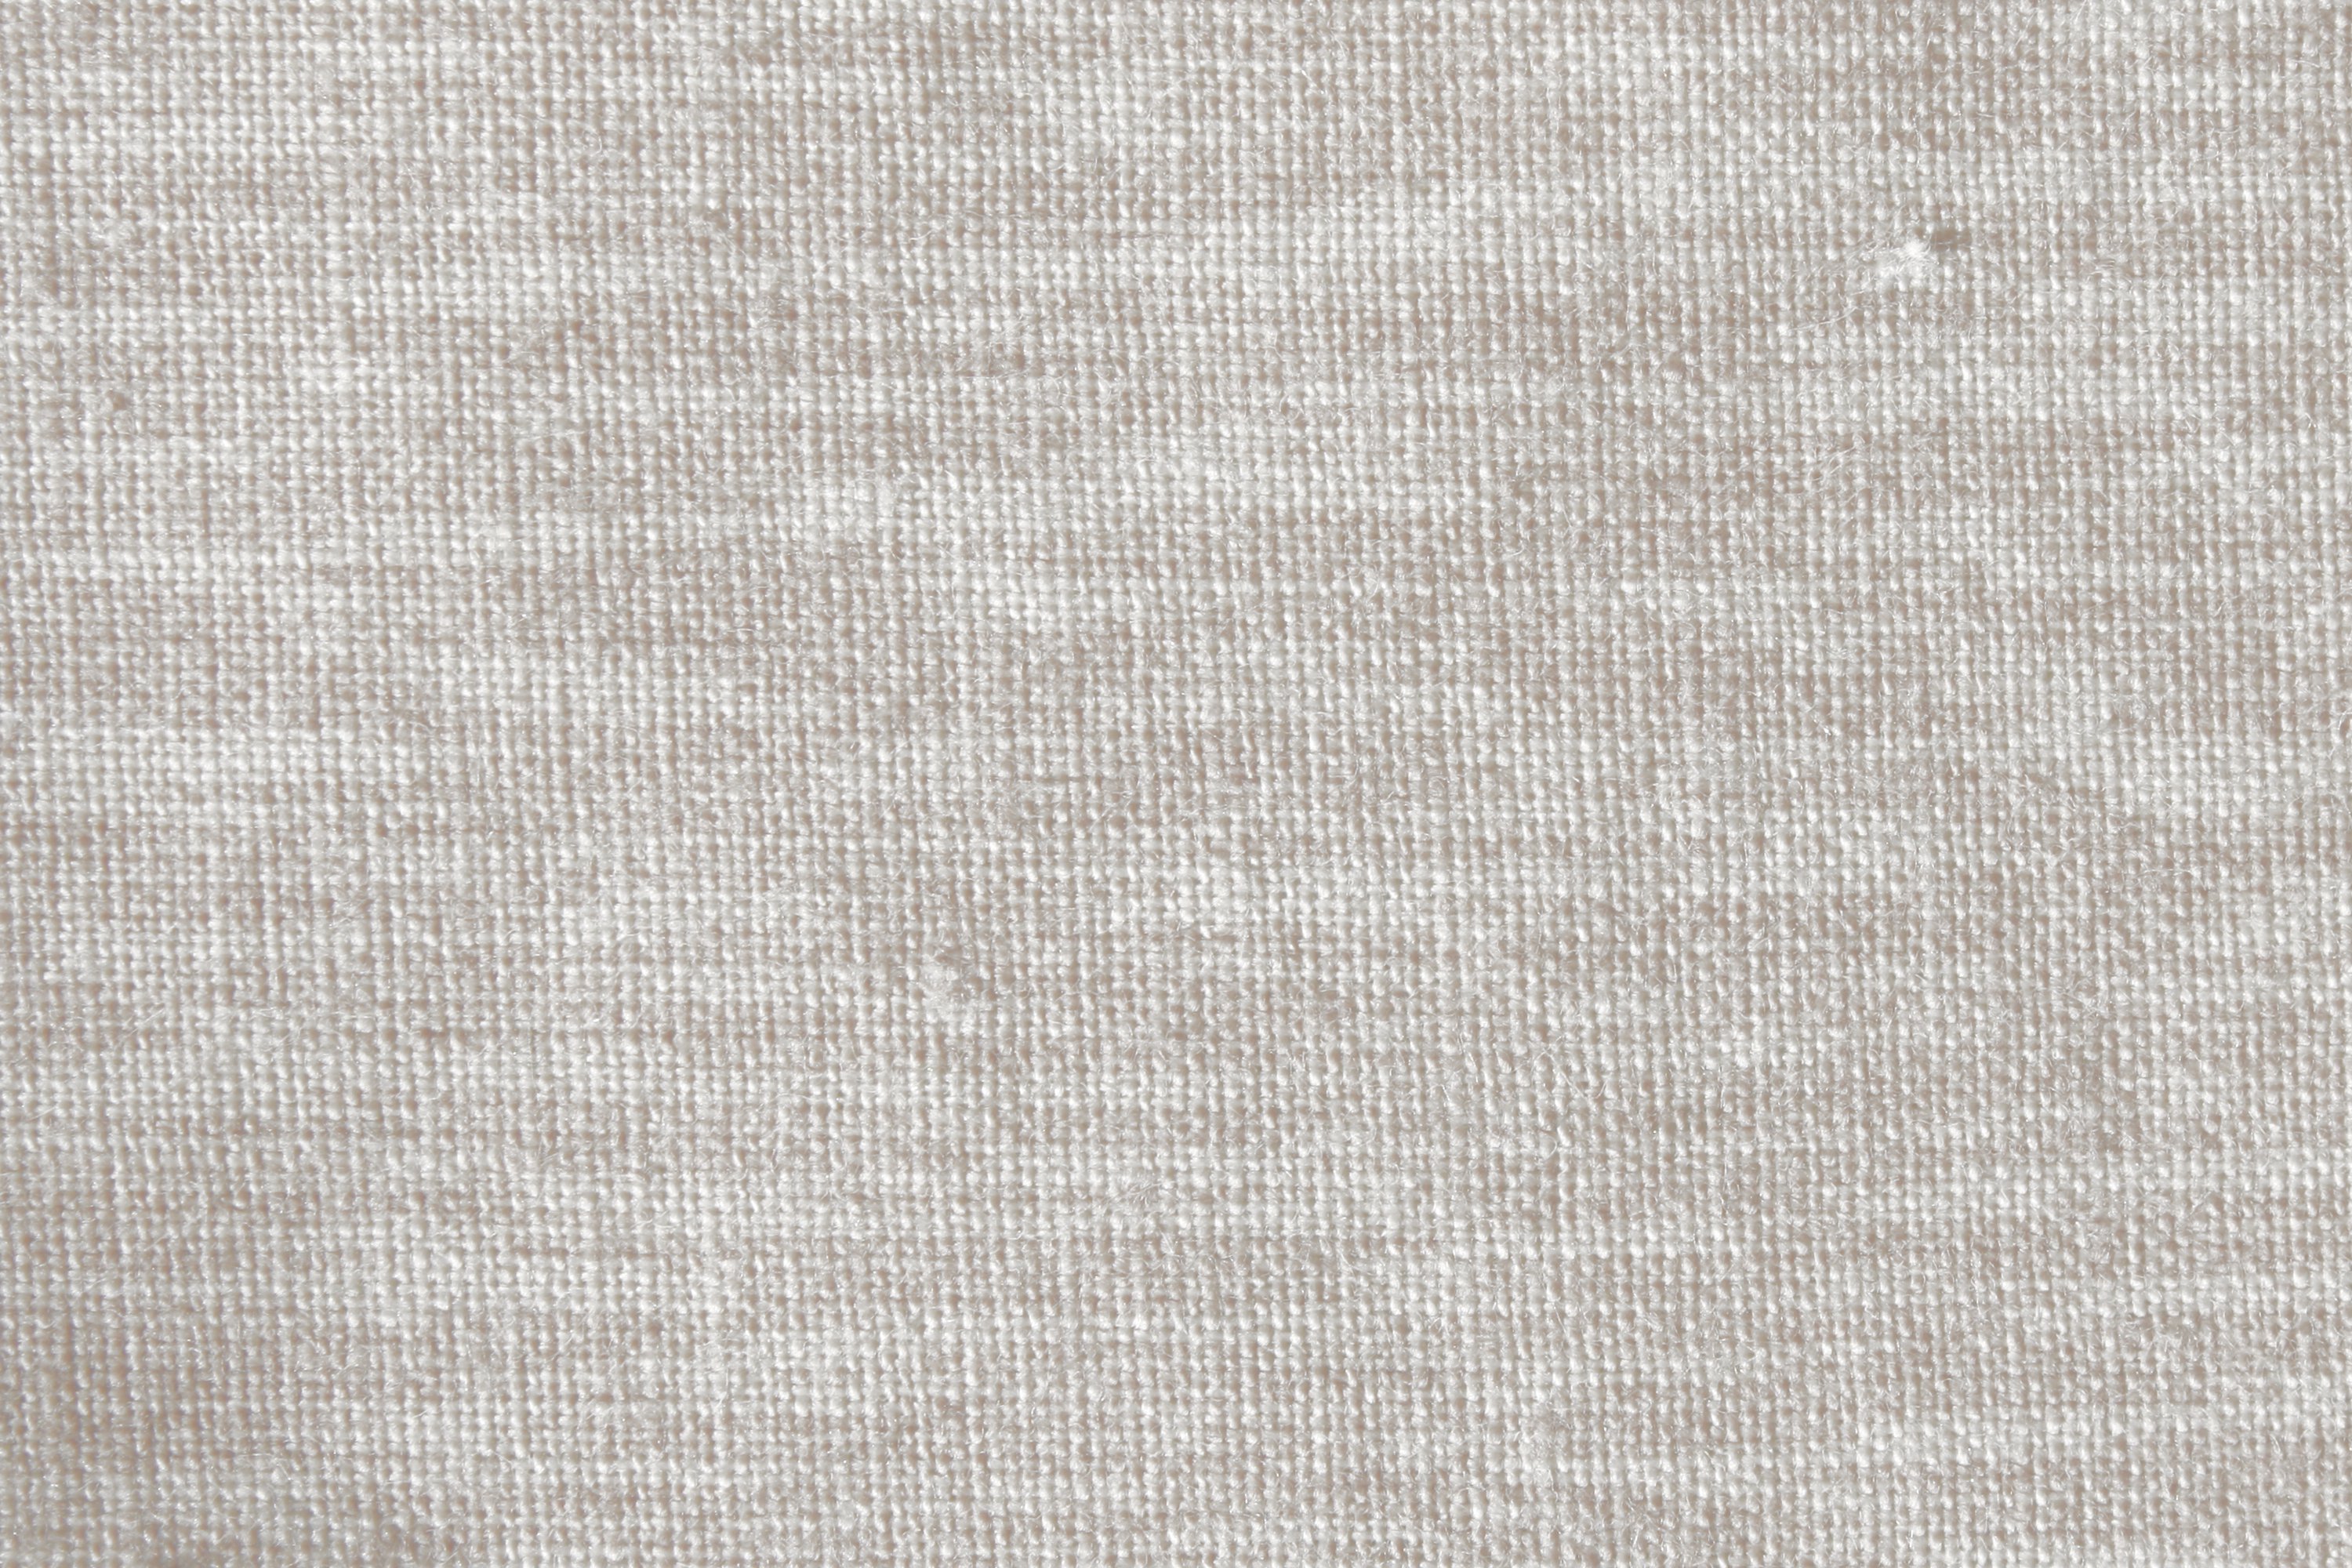 White Woven Fabric Close Up Texture Picture Photograph Photos